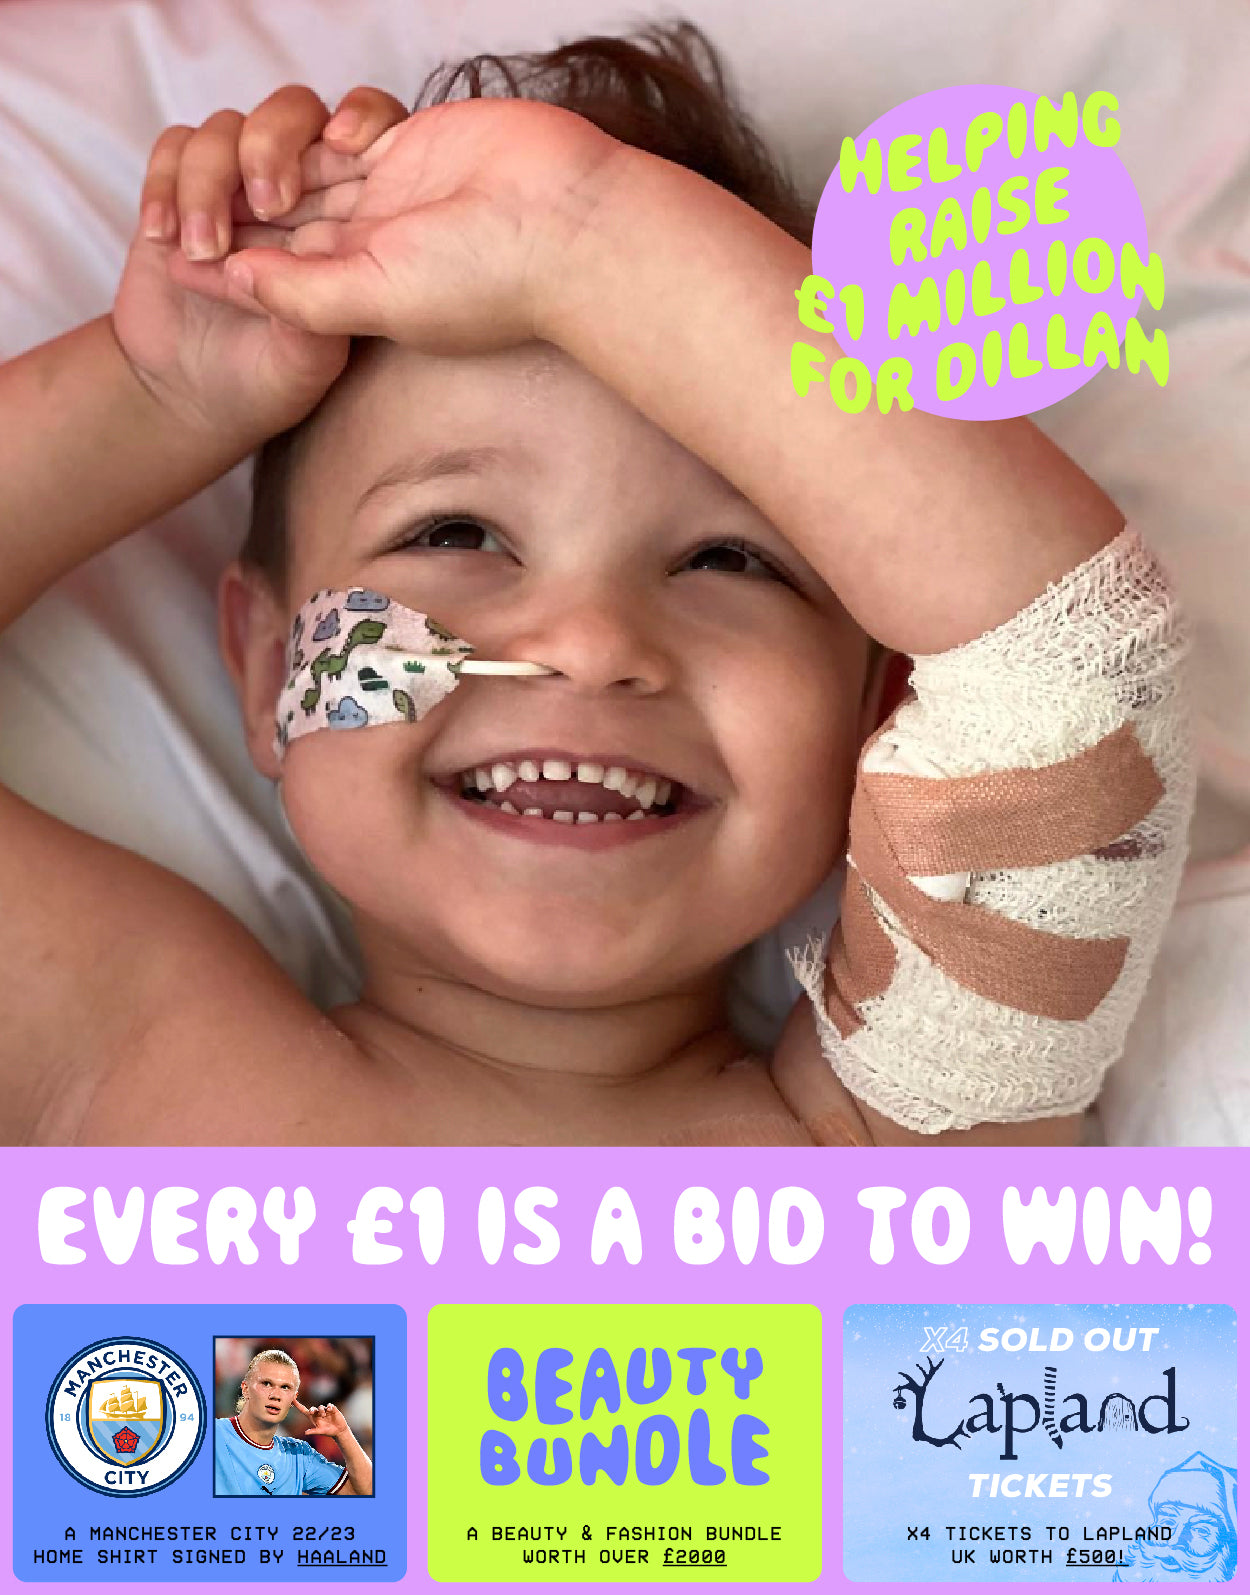 Helping 5 year old Dillan get his potentially lifesaving cancer treatment - Every £1 is a bid to win! - A Manchester City 22/23 Home Shirt signed by Haaland - A beauty & fashion bundle worth over £2,000+ - x4 tickets to Lapland UK worth £500 - The more tickets you buy, the more entries you get. Let's raise £1 million for Dillan